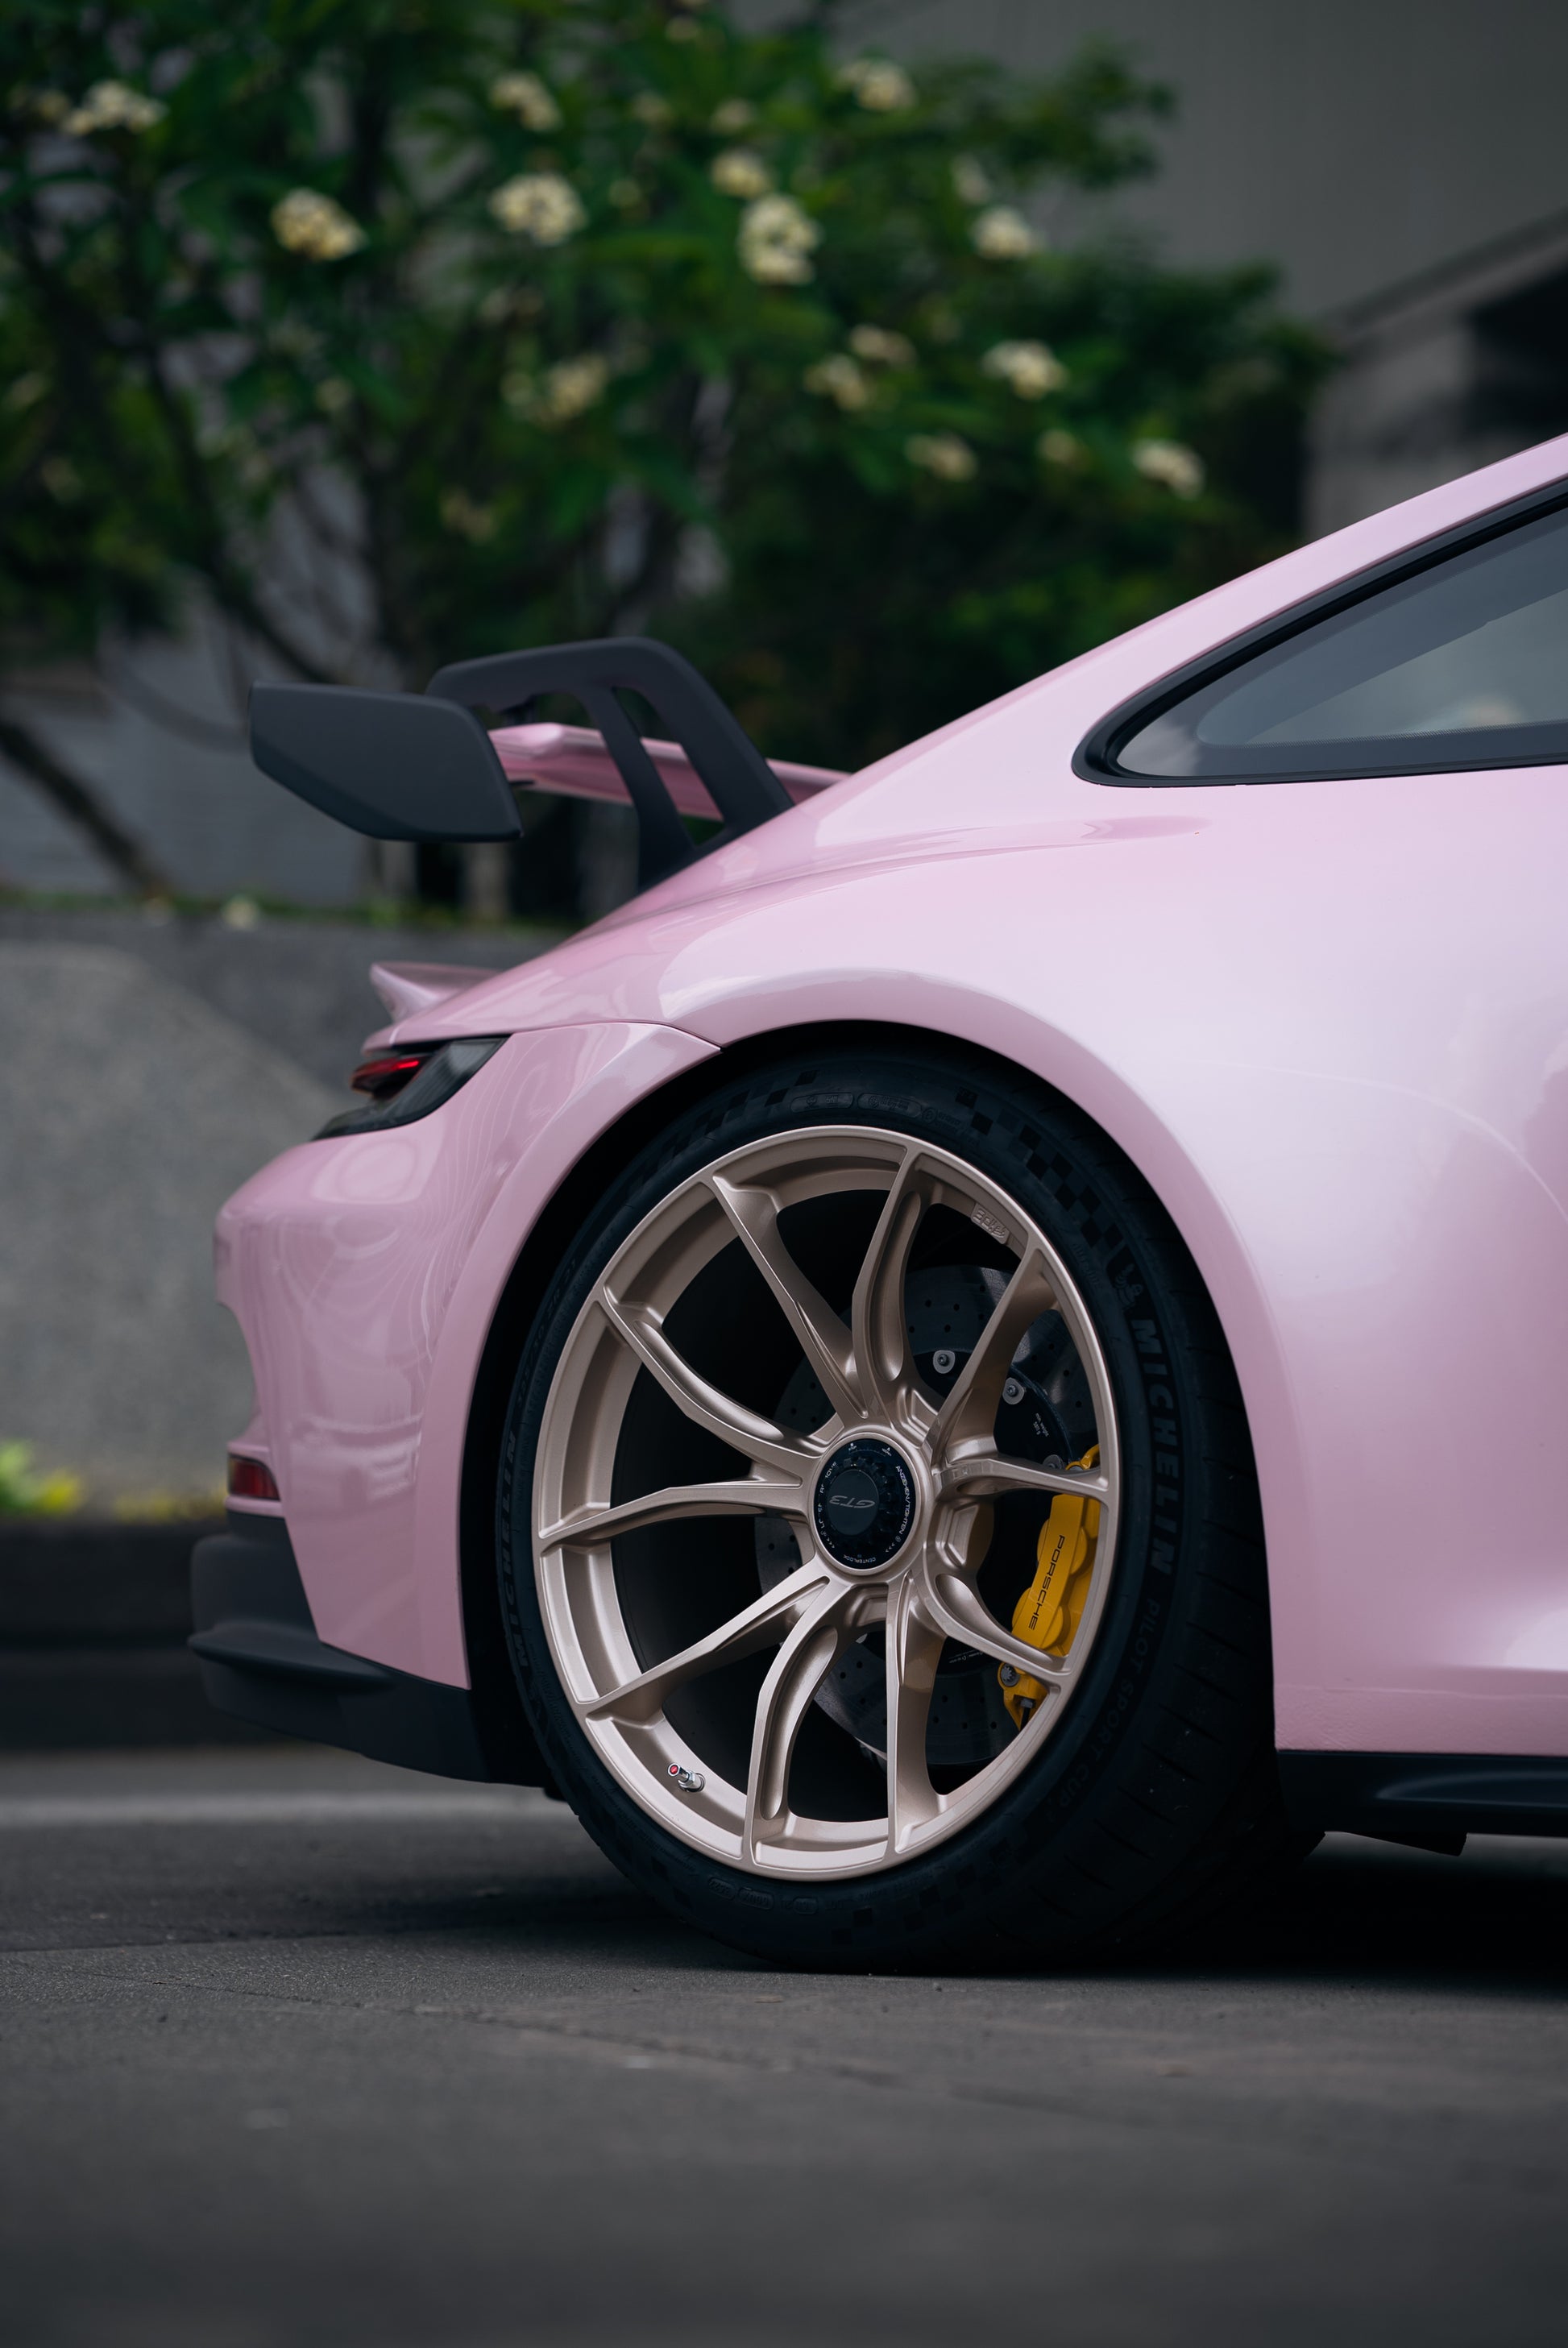 View of the offside rear quarter of a Pink Porsche GT3 with an IPE MFR-01 Magnesium wheel fitted